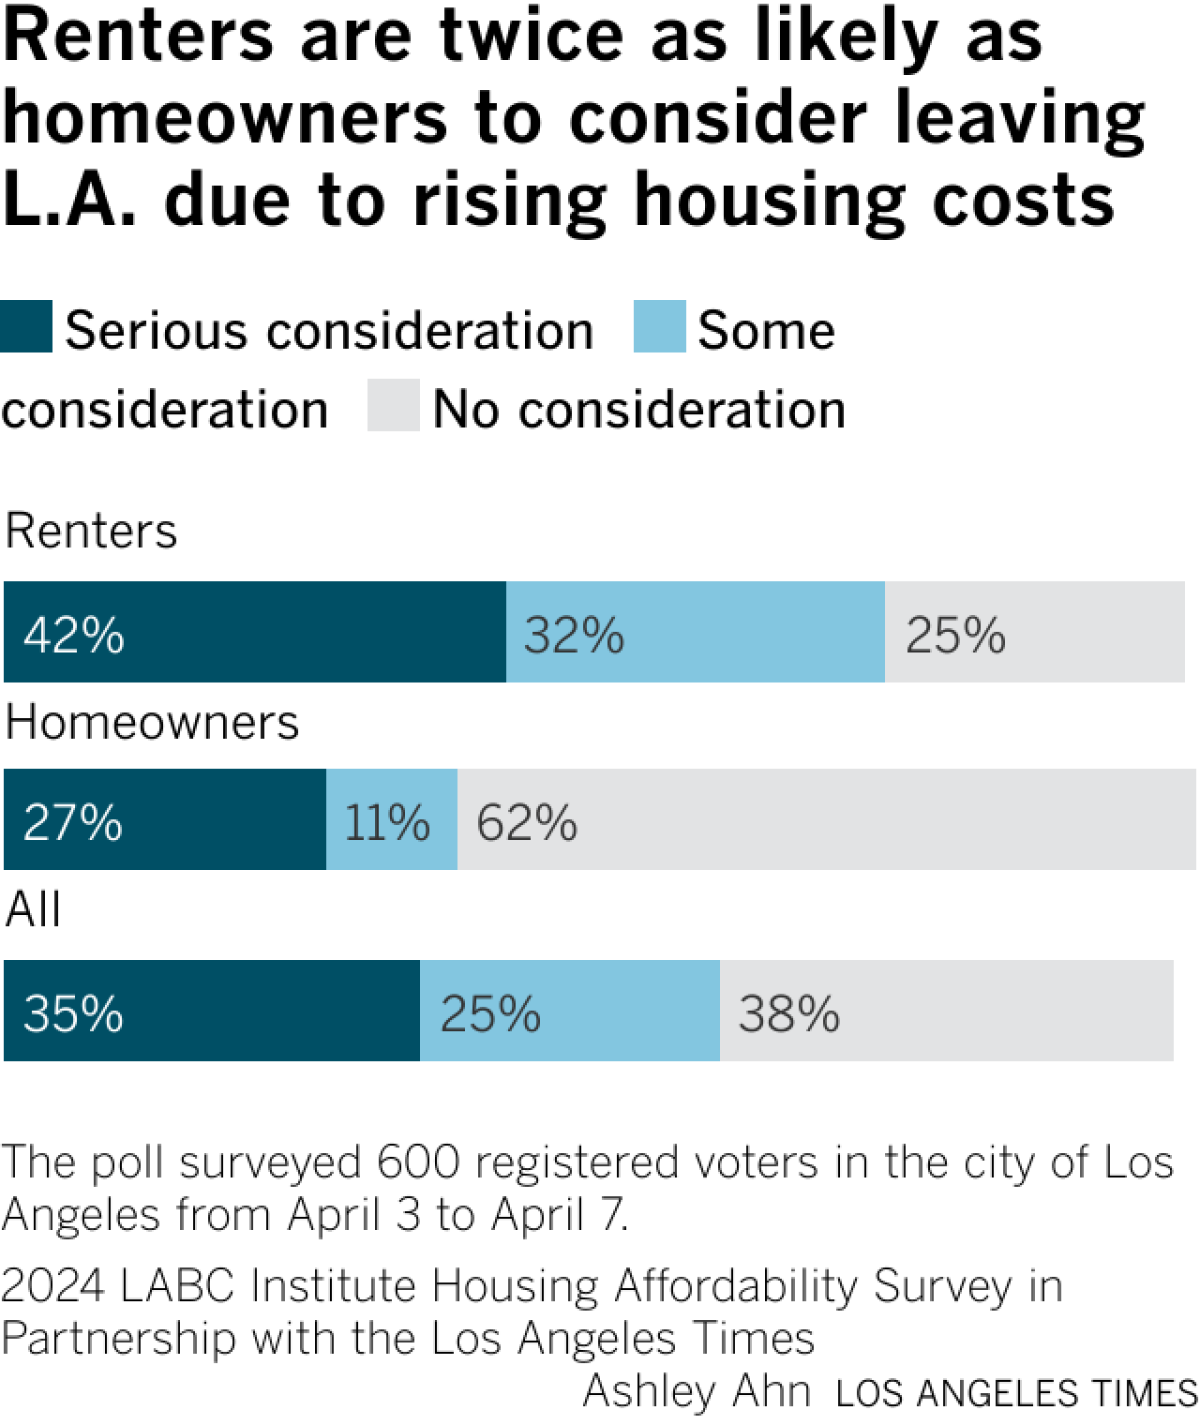 Stacked bar chart shows that 38% of homeowners and 74% of renters have considered leaving L.A. because of rising costs of housing.